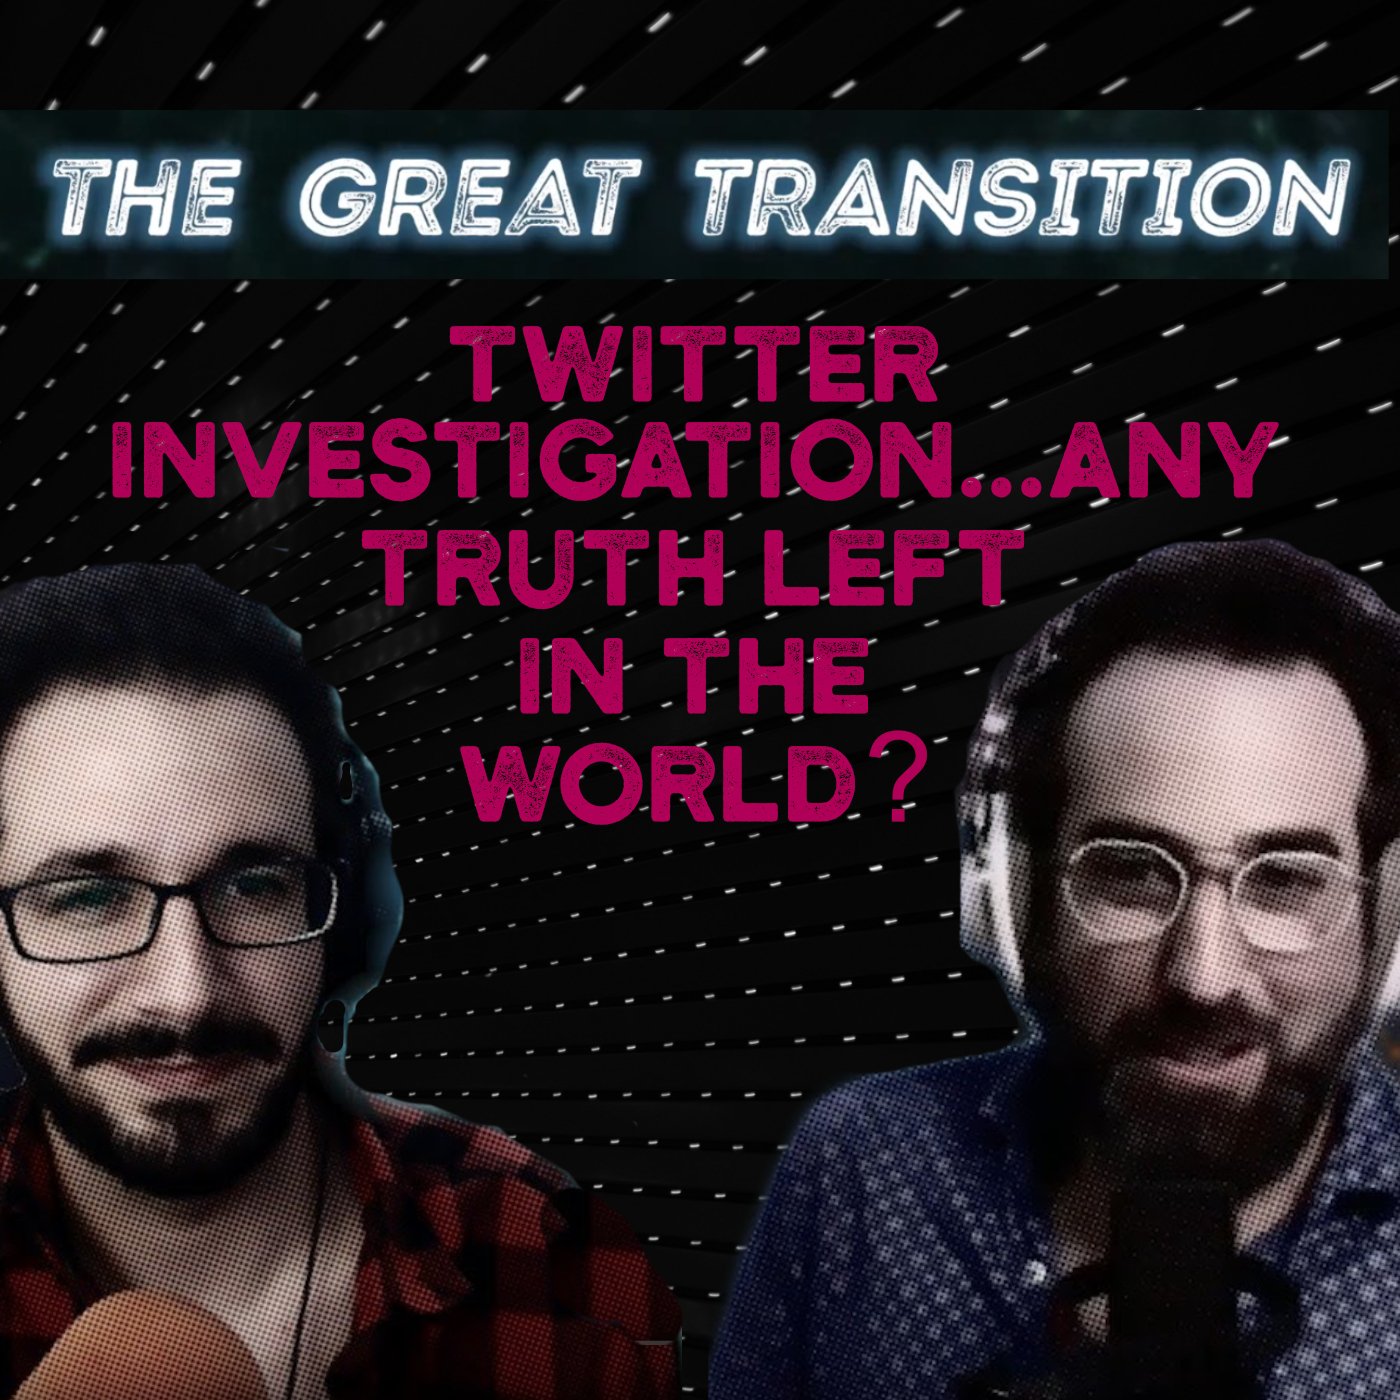 The Great Transition - Twitter Investigation...Any Truth Left In The World?